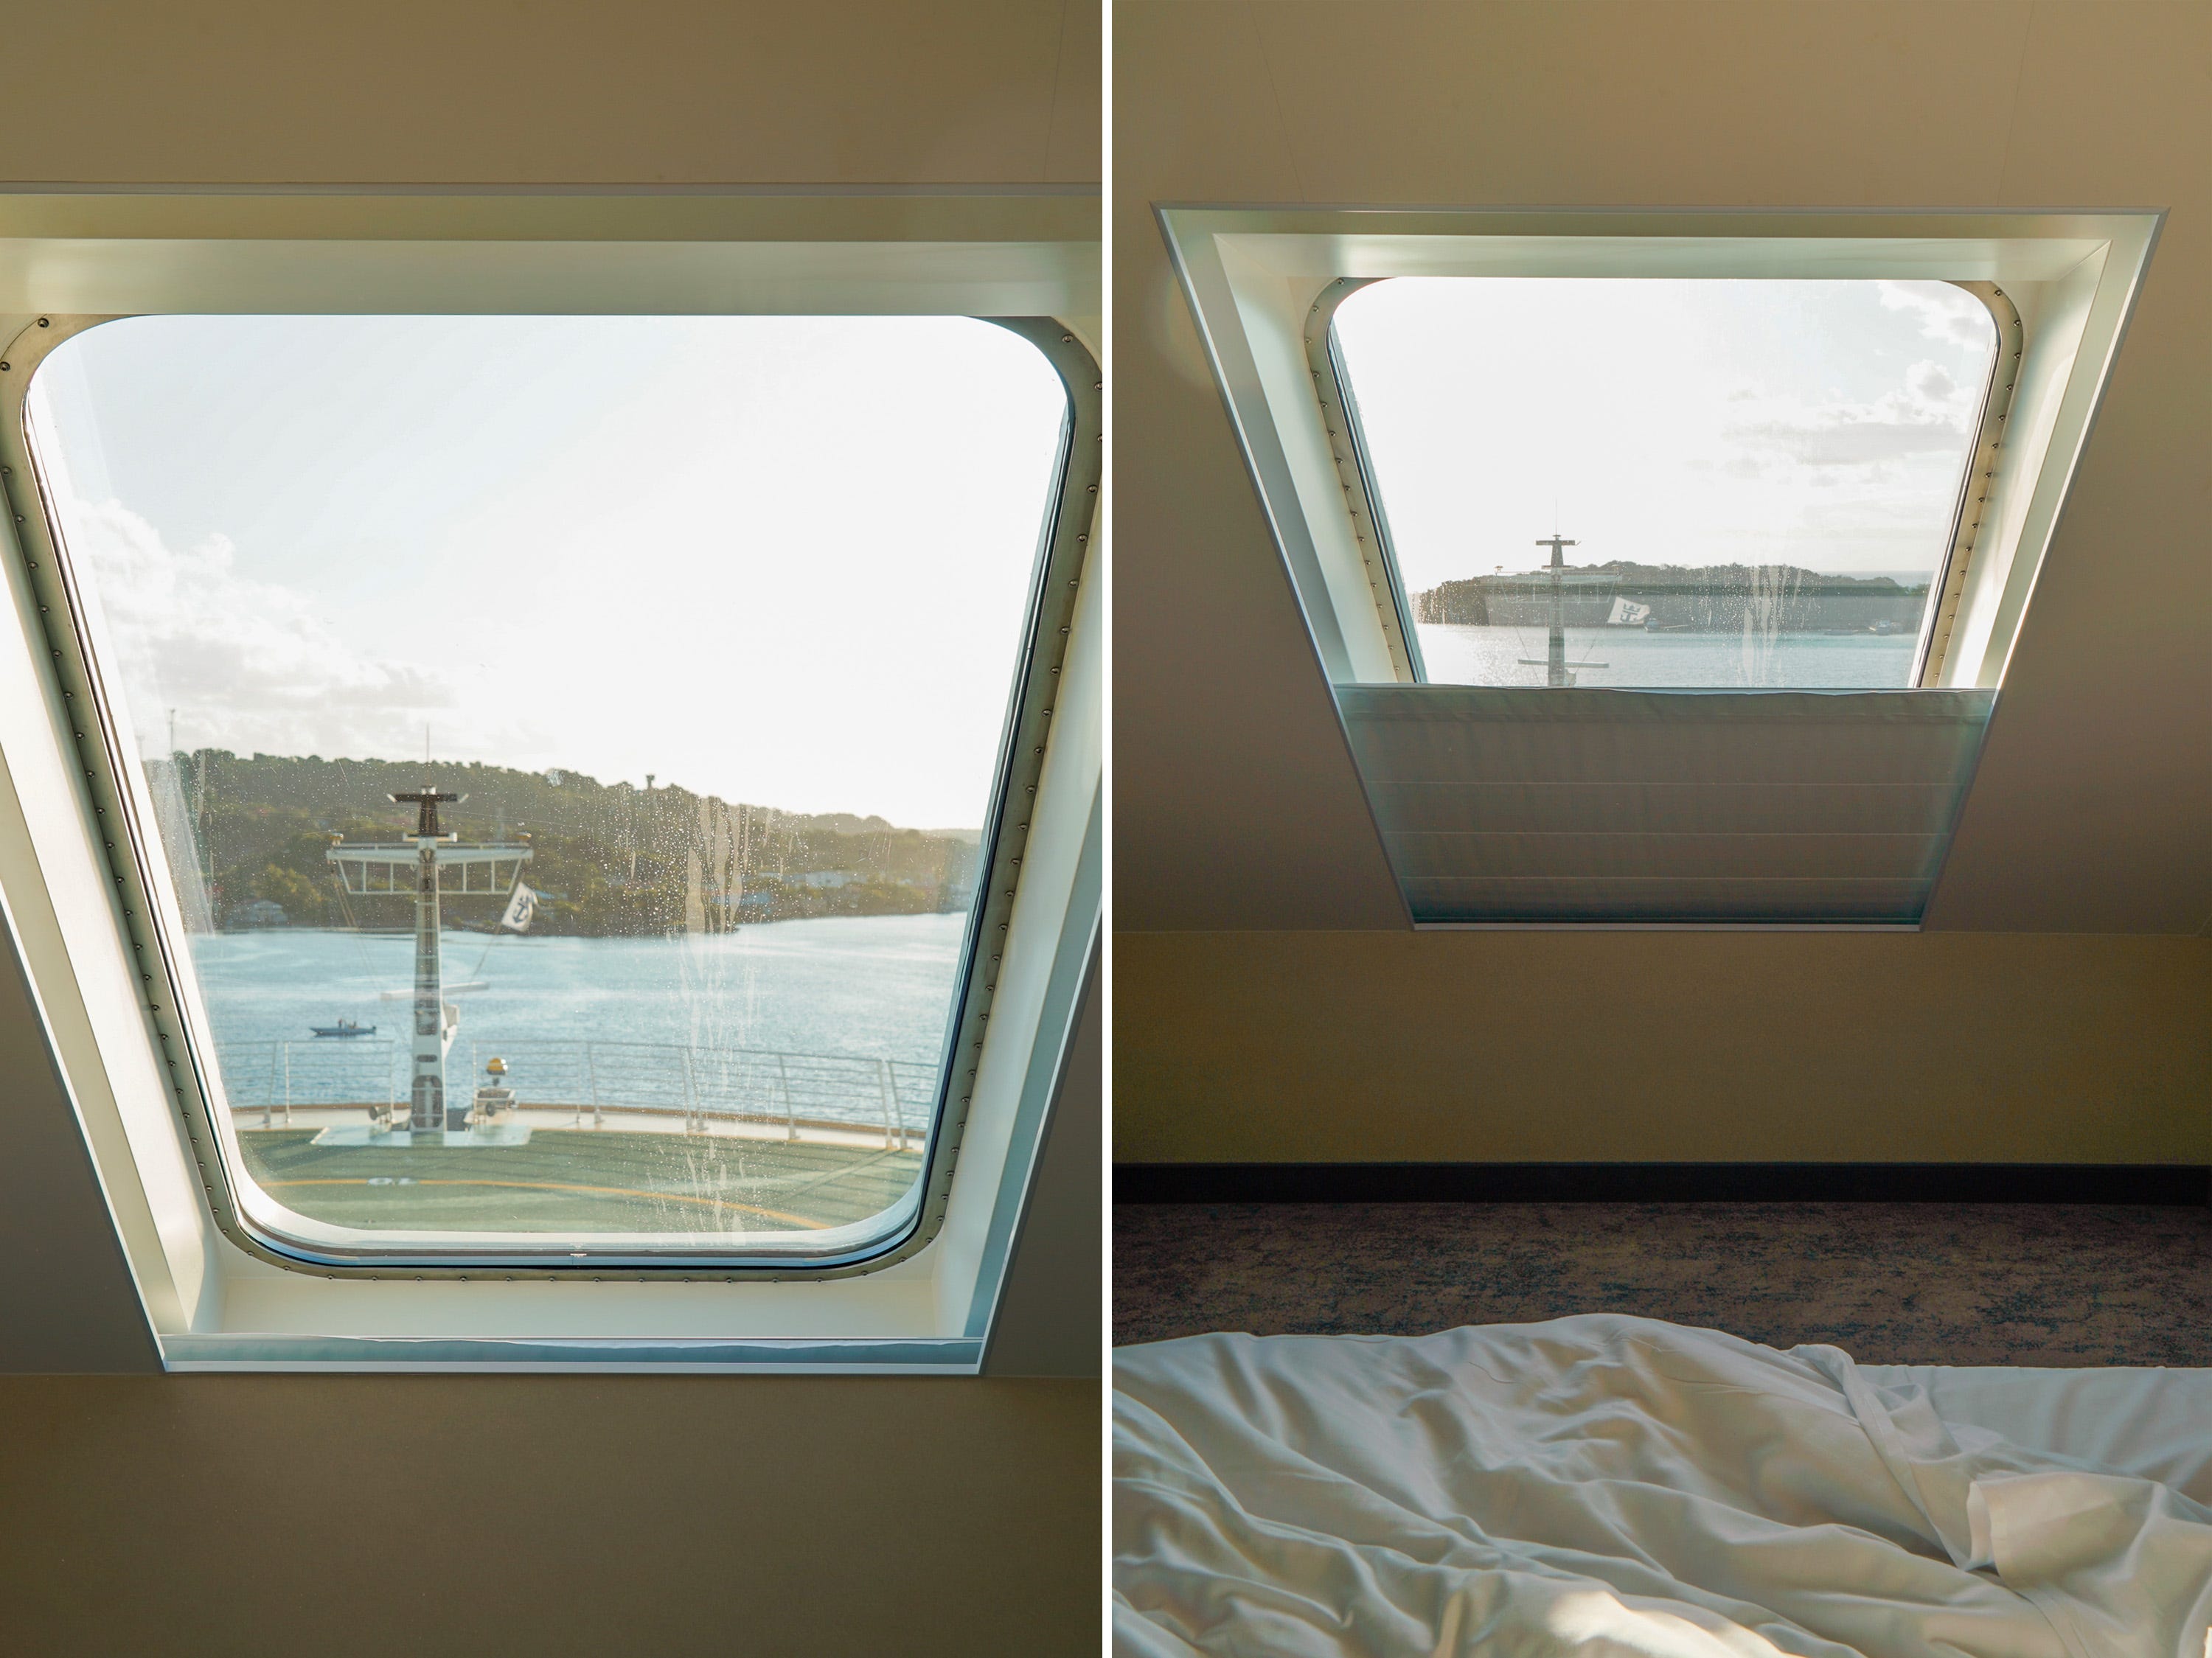 <p>An electronic shade over the window could be brought down during the day to reveal some grand views. I loved waking up after a night at sea to a front-row view of the place I'd be visiting that day. </p><p>While windowless rooms are cheaper, I couldn't imagine staying in a room without one. My oceanview stateroom cost about $300 more than an entry-level room.</p>